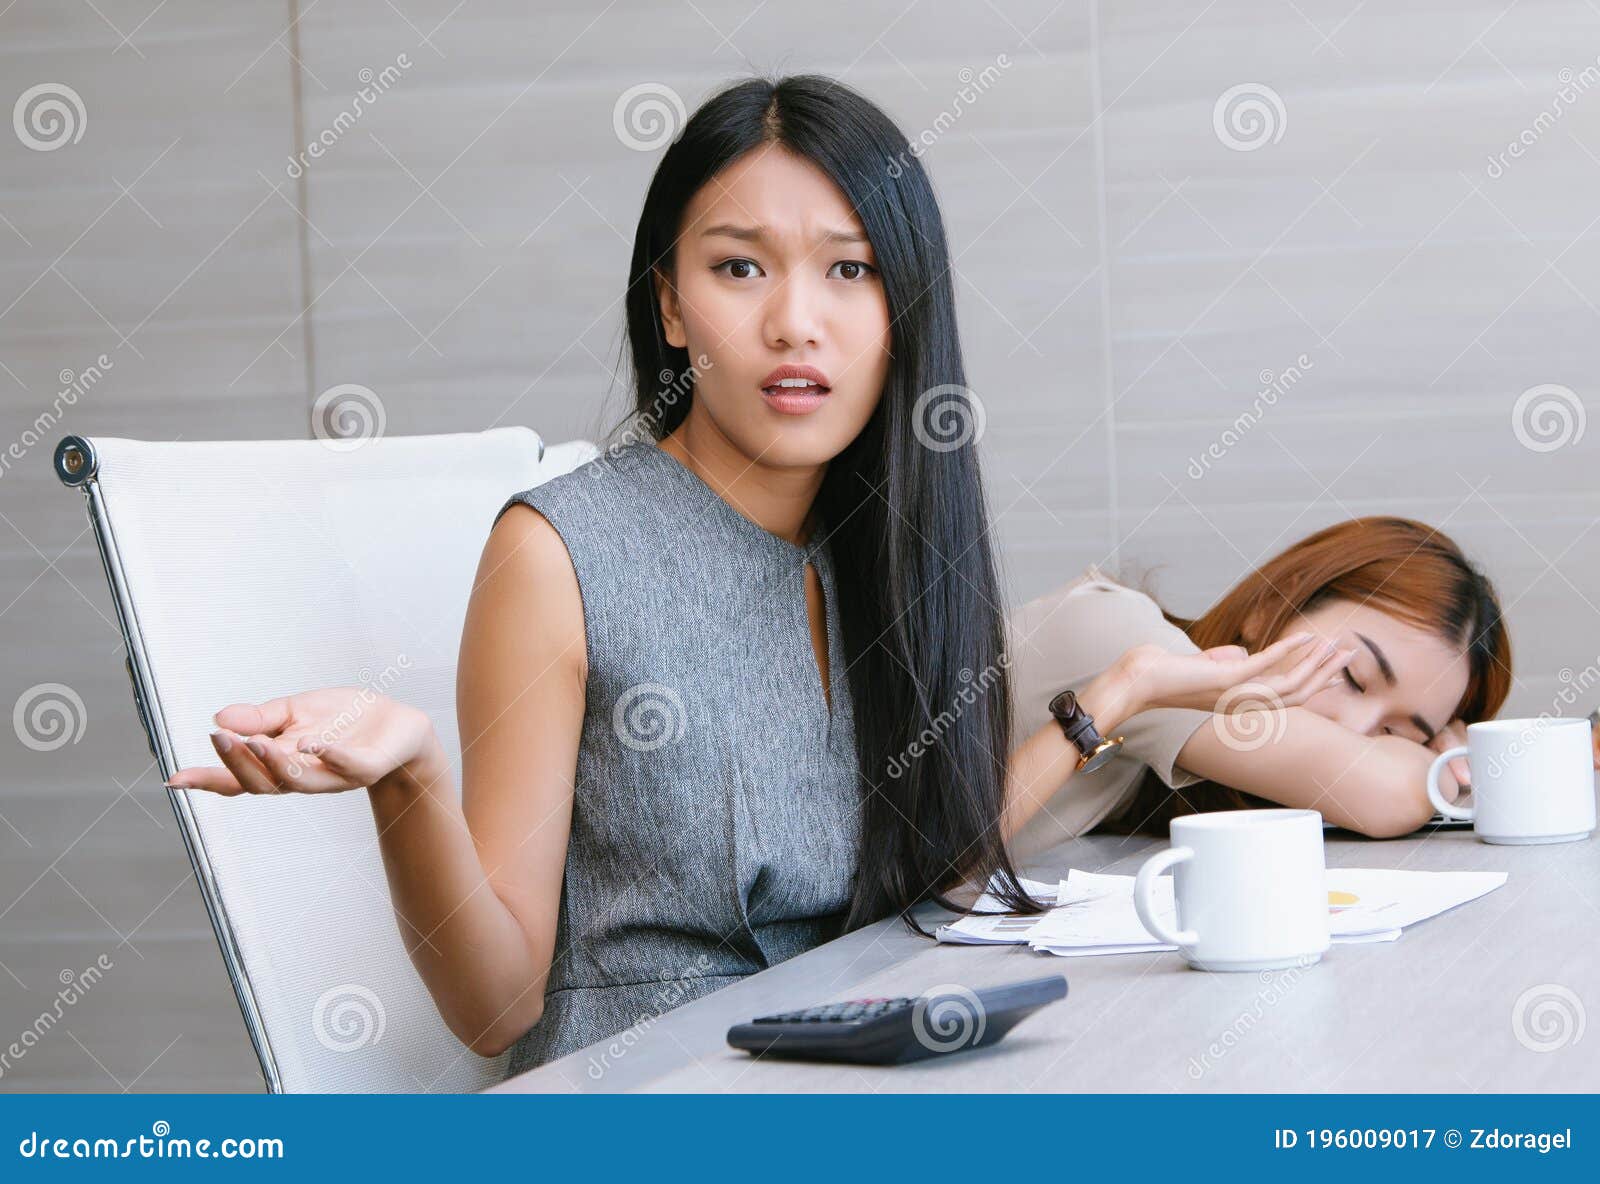 portrait of young asian businesswoman with arms out, shrugging her shoulders,saying: who cares, while workplace during work